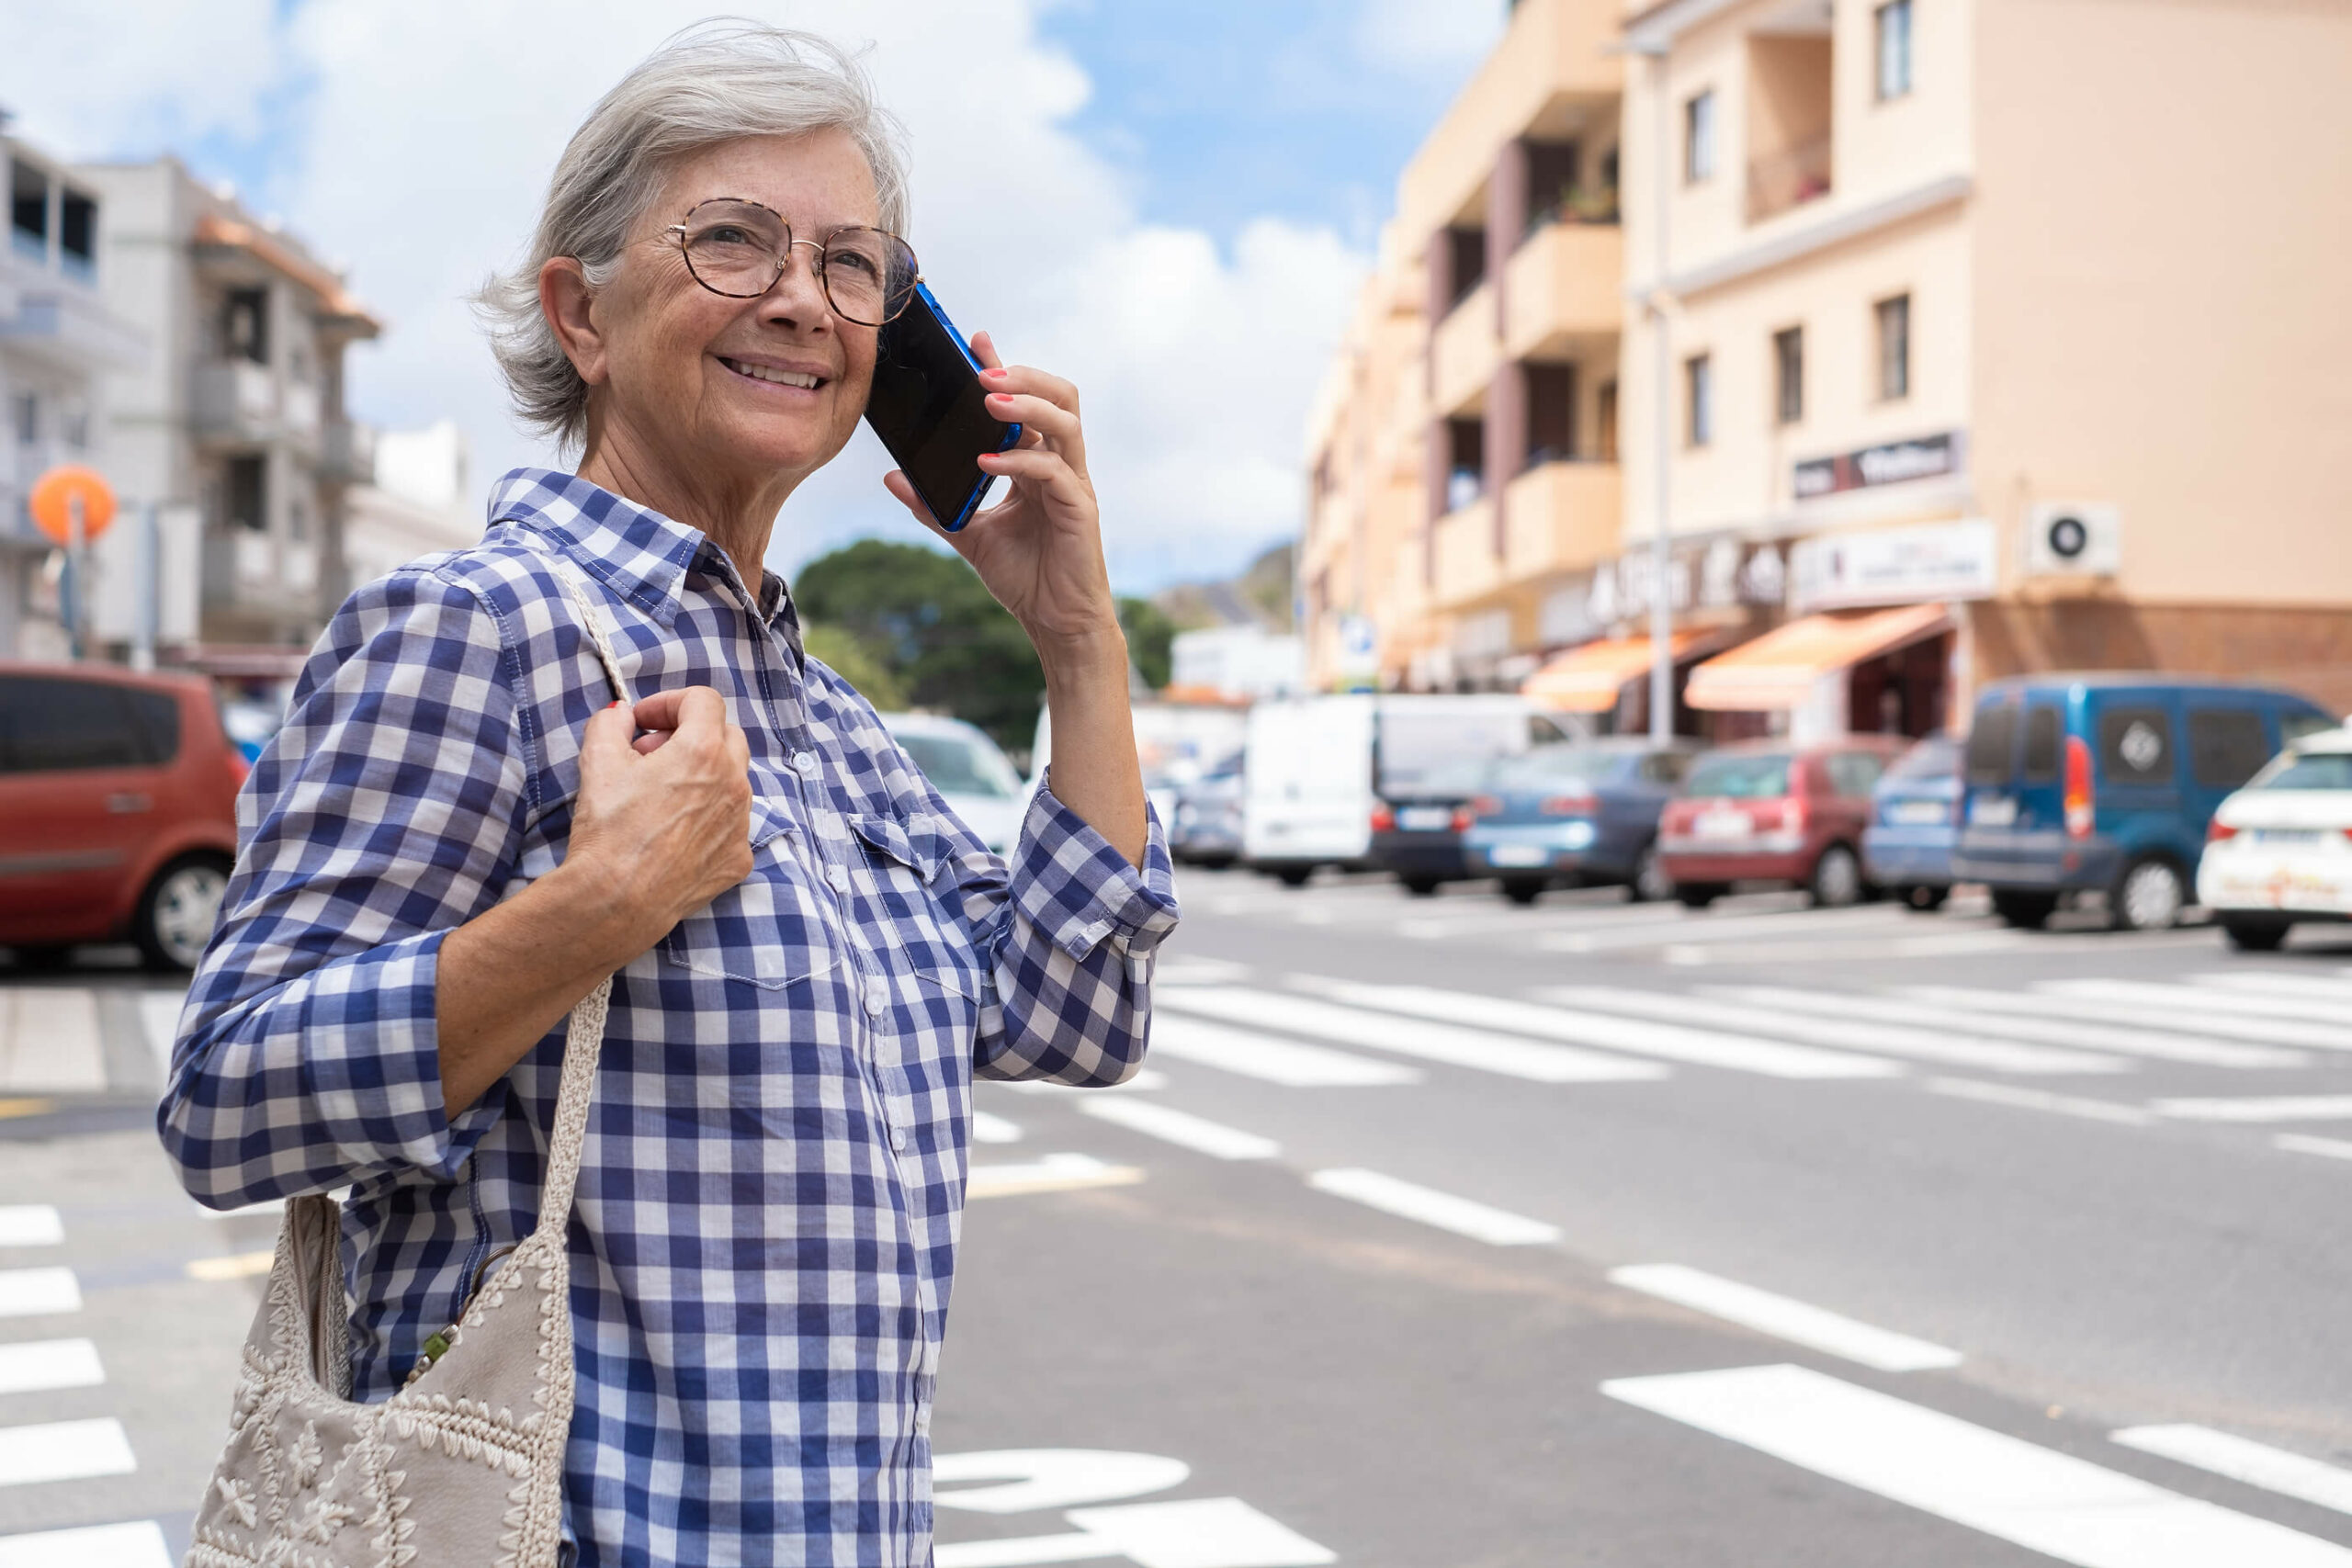 Older woman with hearing loss crossing a street with a smart phone up to her ear